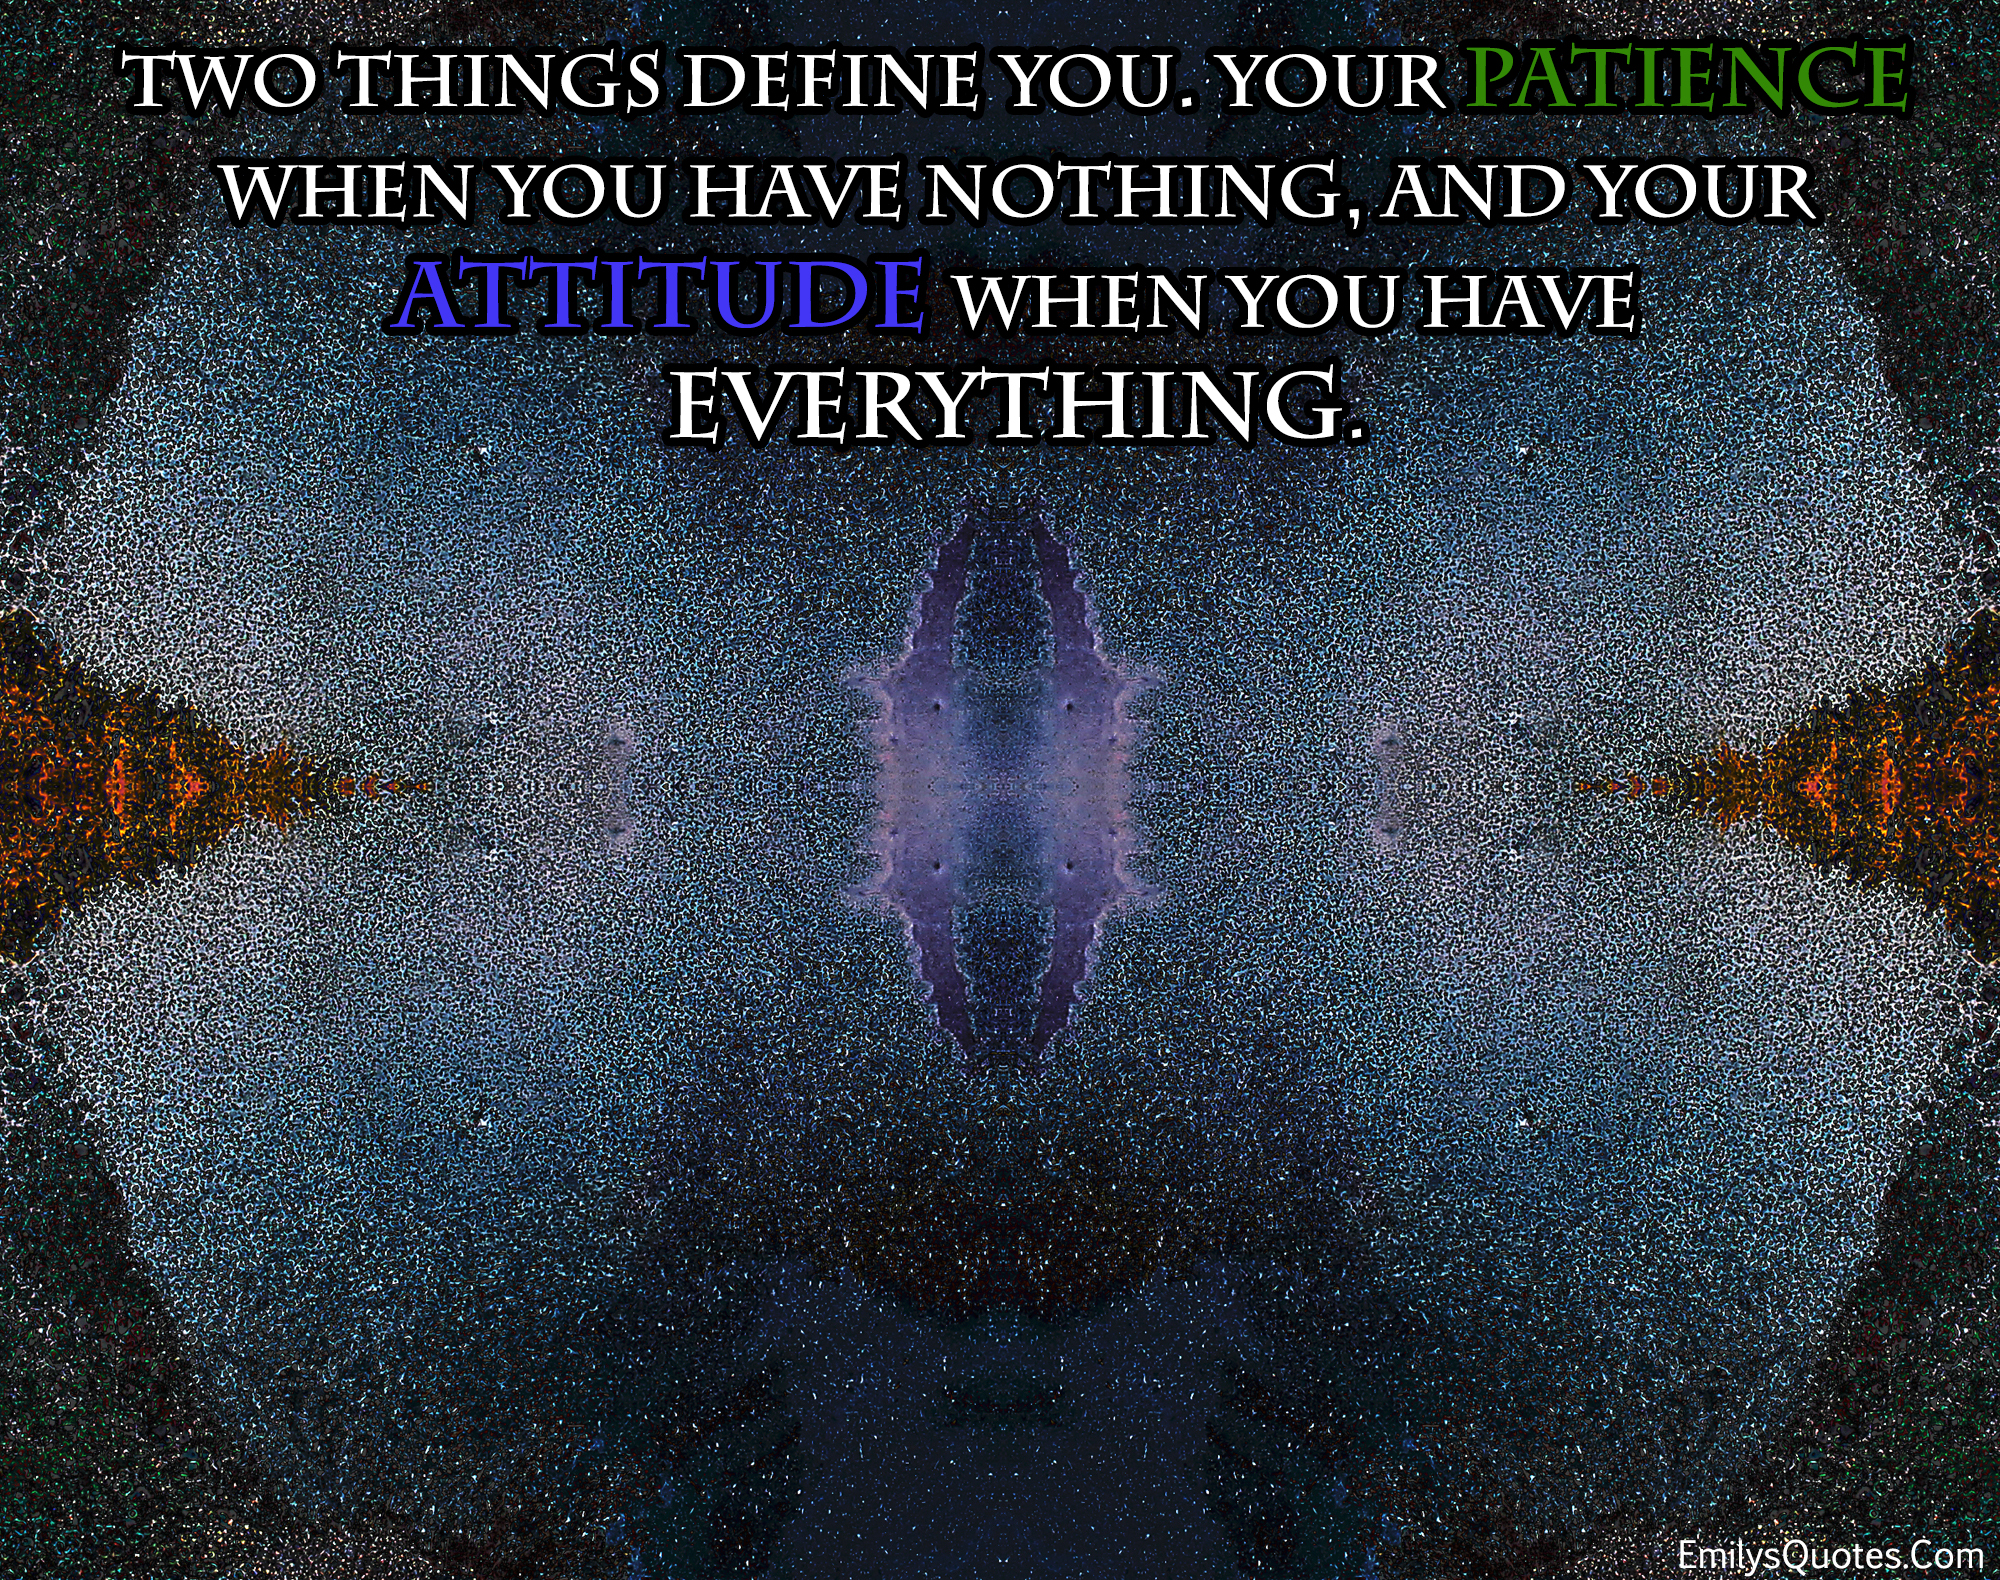 Two things define you. Your patience when you have nothing and